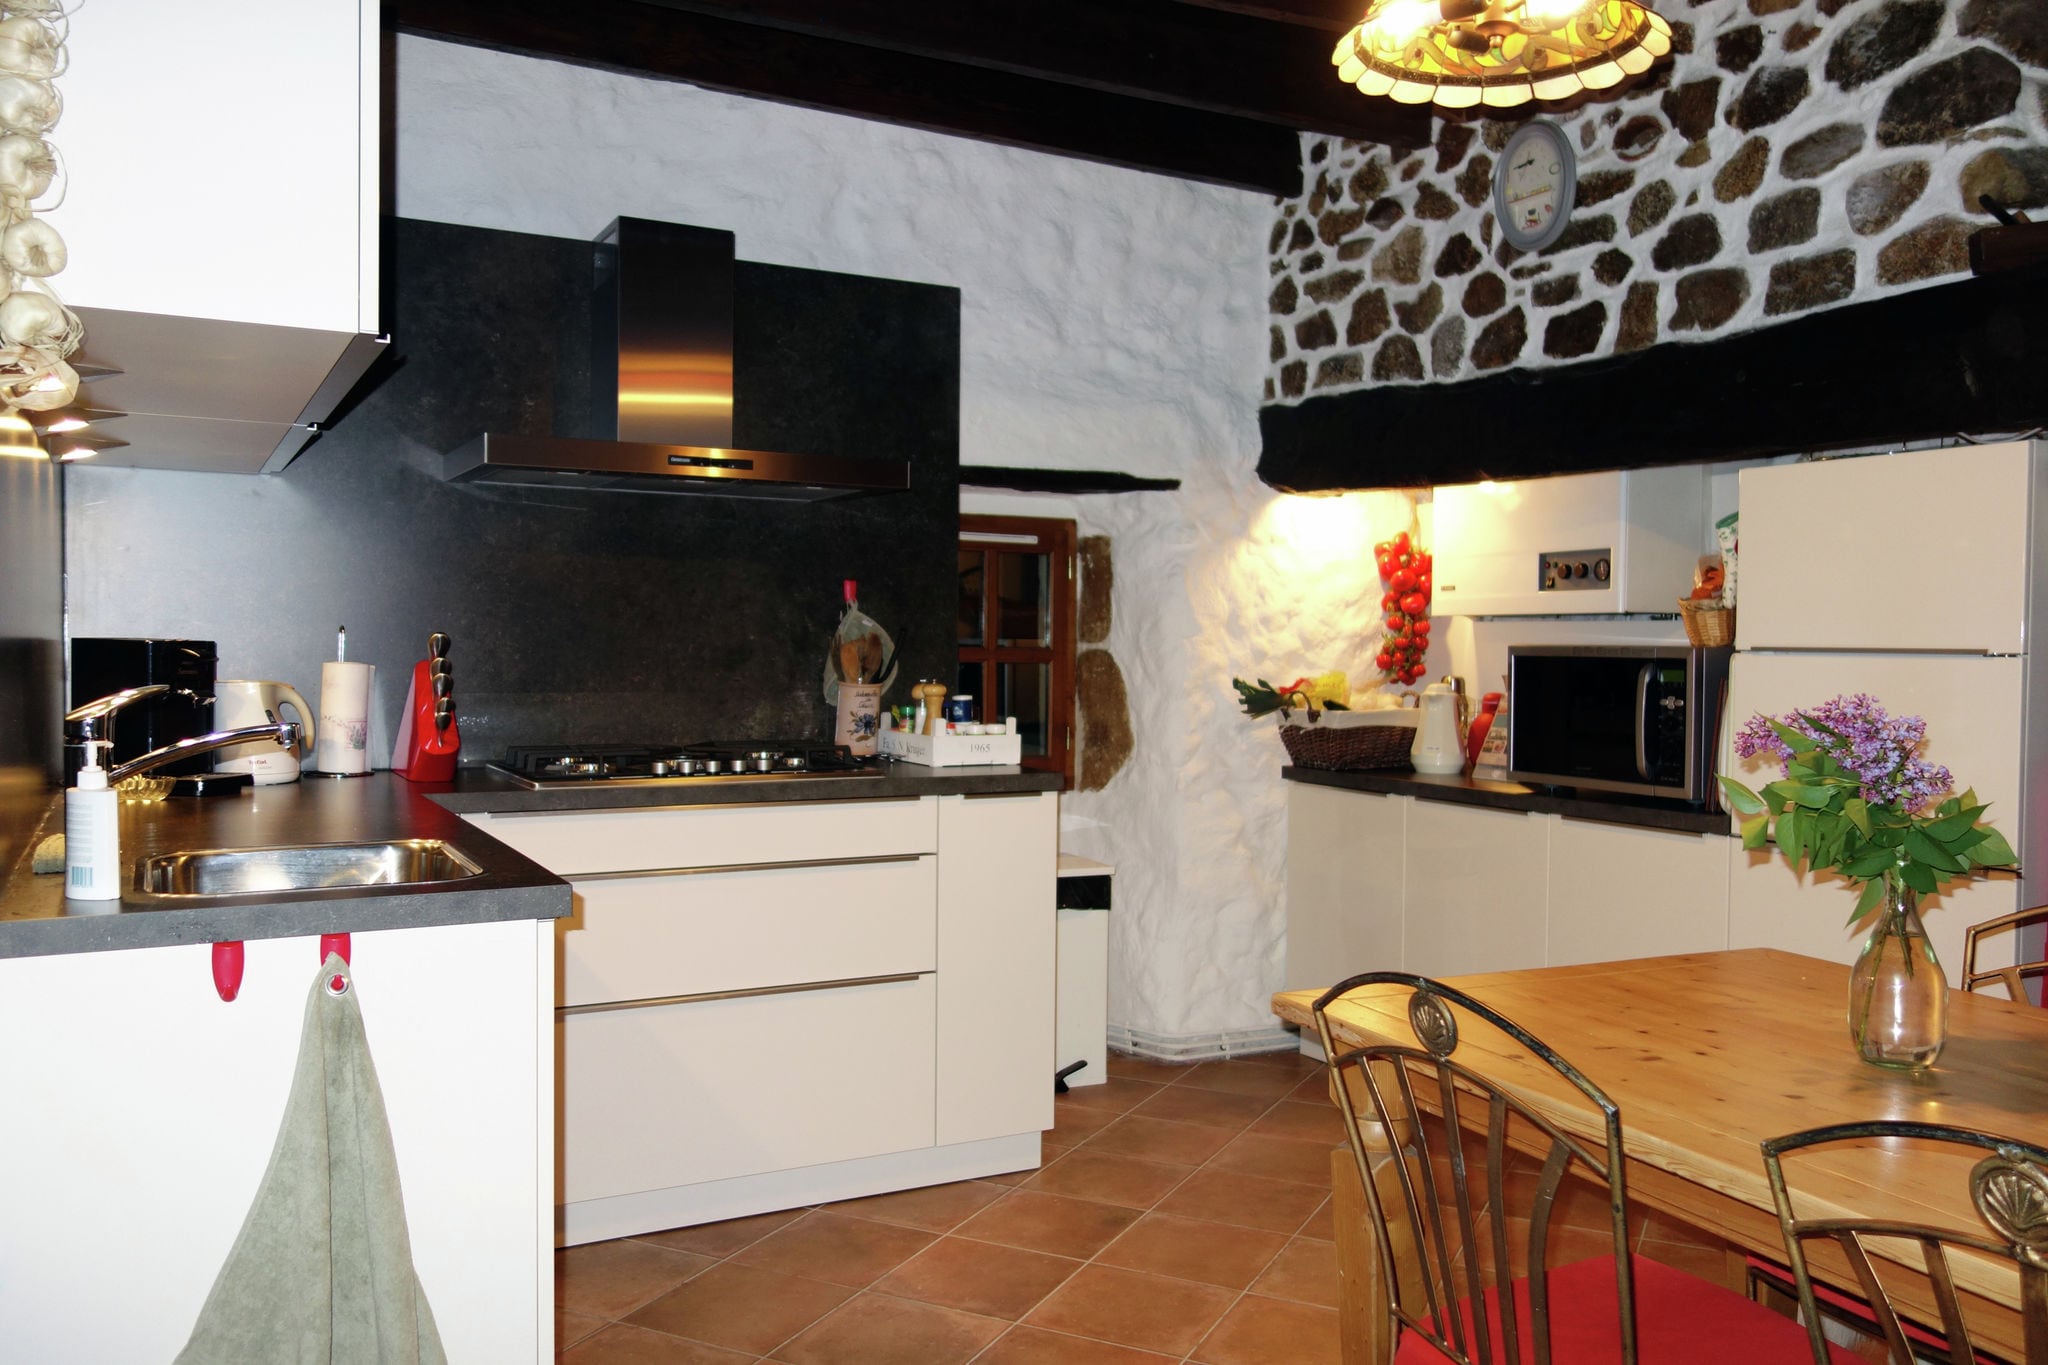 Snug holiday home in Dunière-Sur-Eyrieux with swimming pool